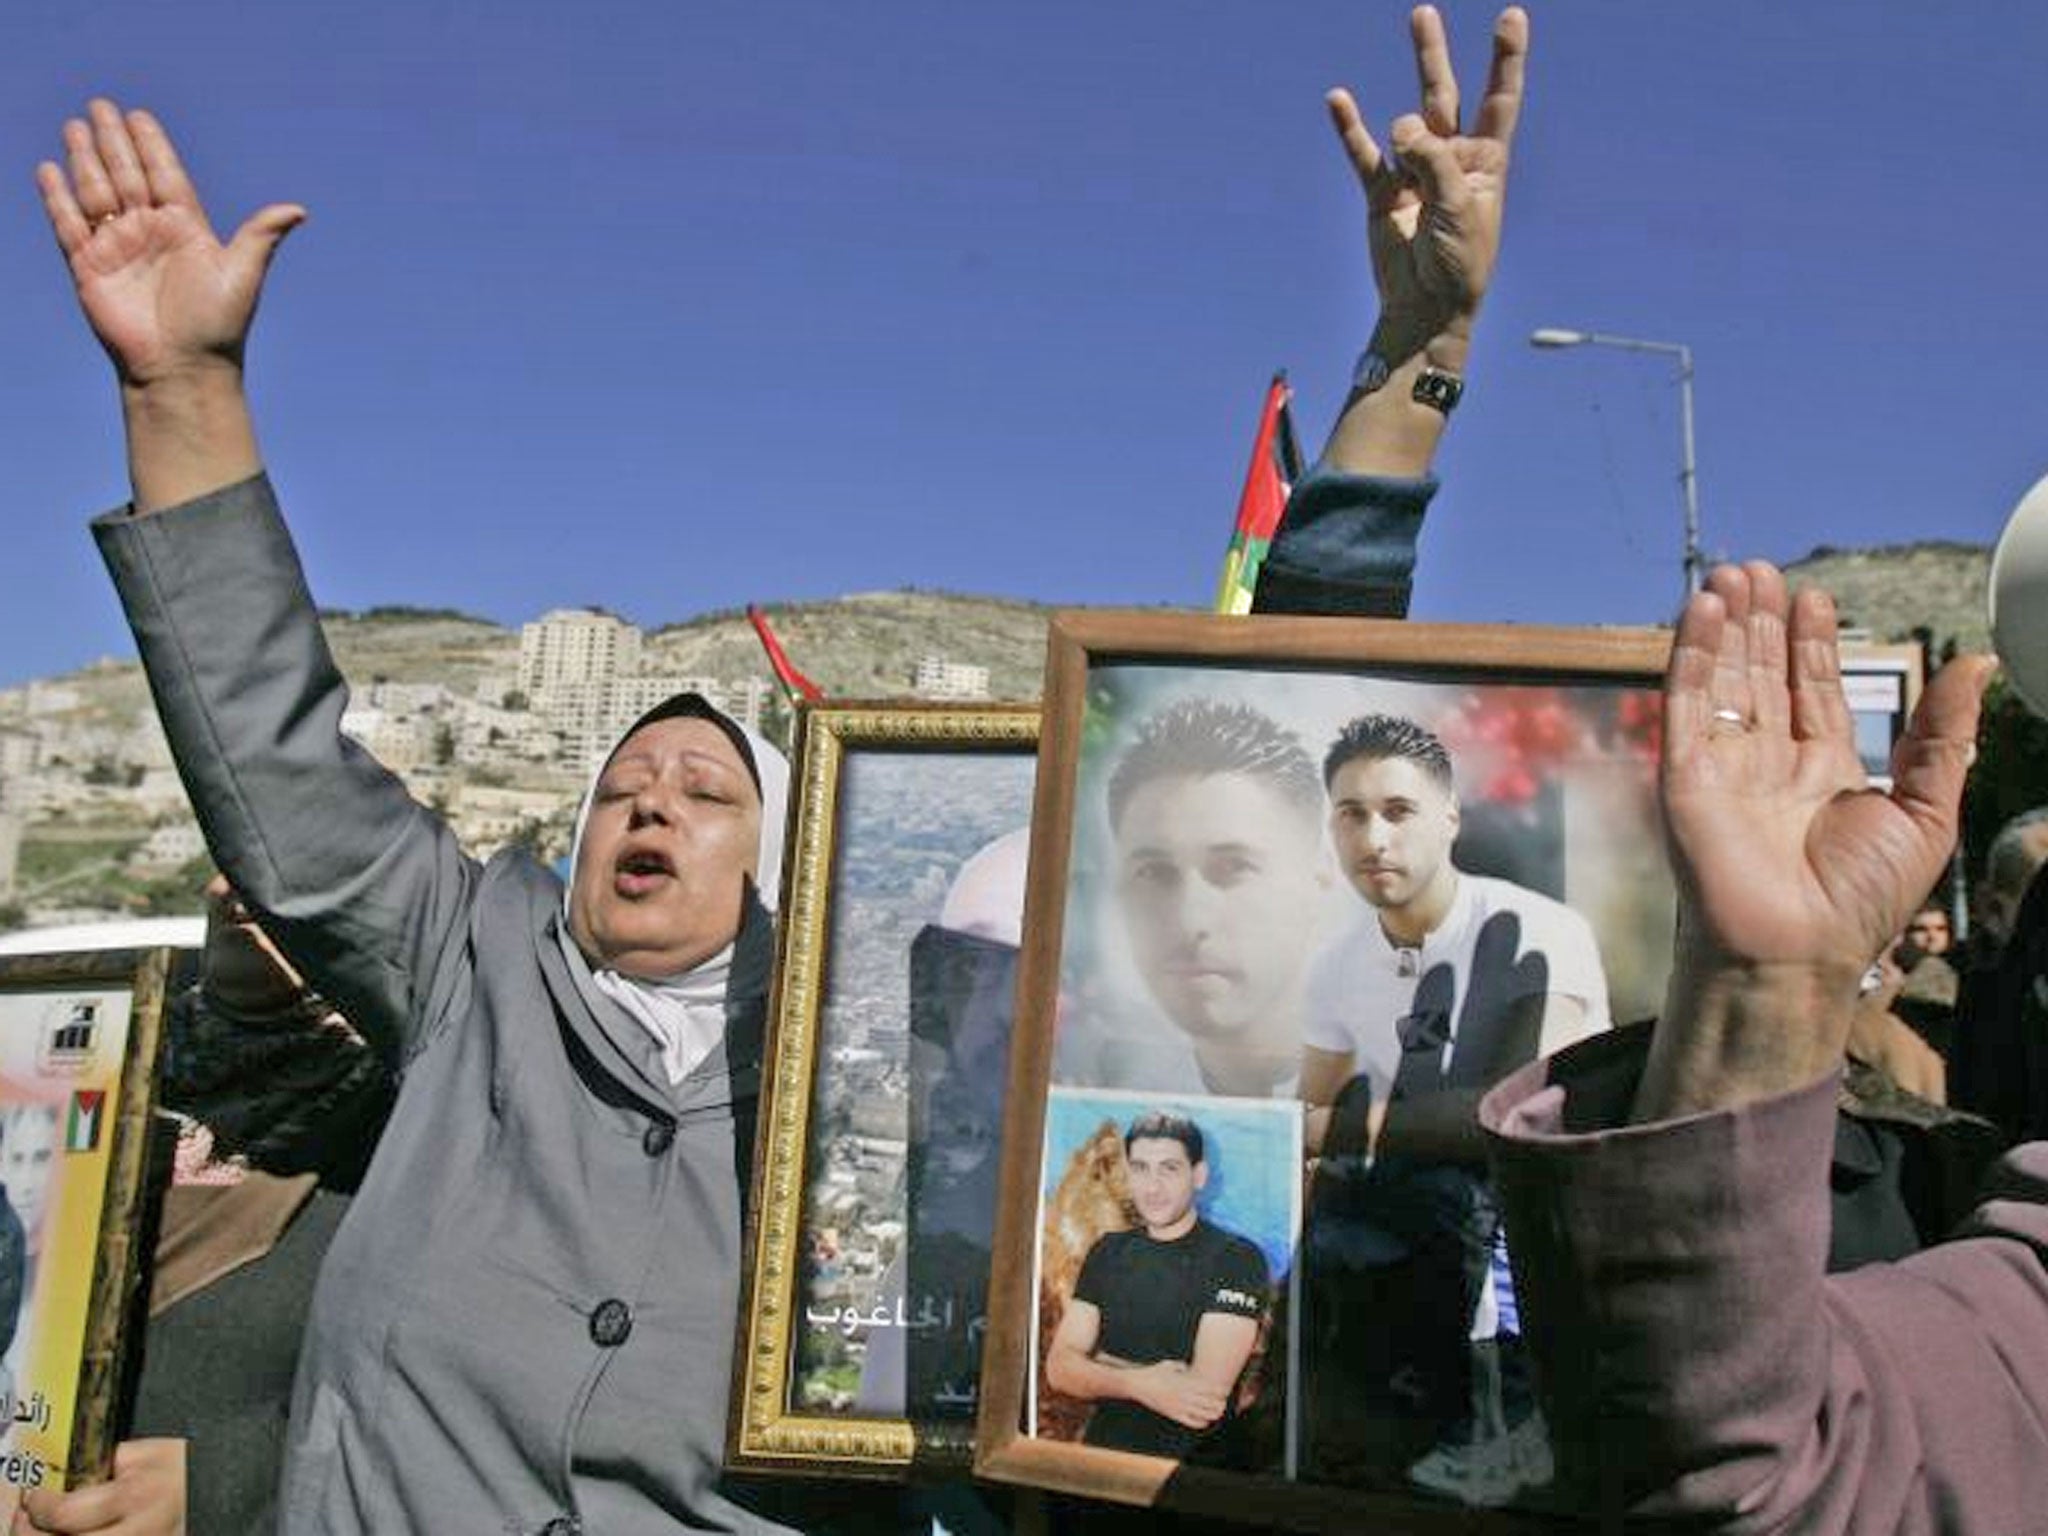 Palestinian women hold pictures of prisoners jailed in Israel during a rally calling for their release, in the West Bank city of Nablus. Israeli forces arrested over 20 members of the Palestinian militant group Hamas, including three lawmakers